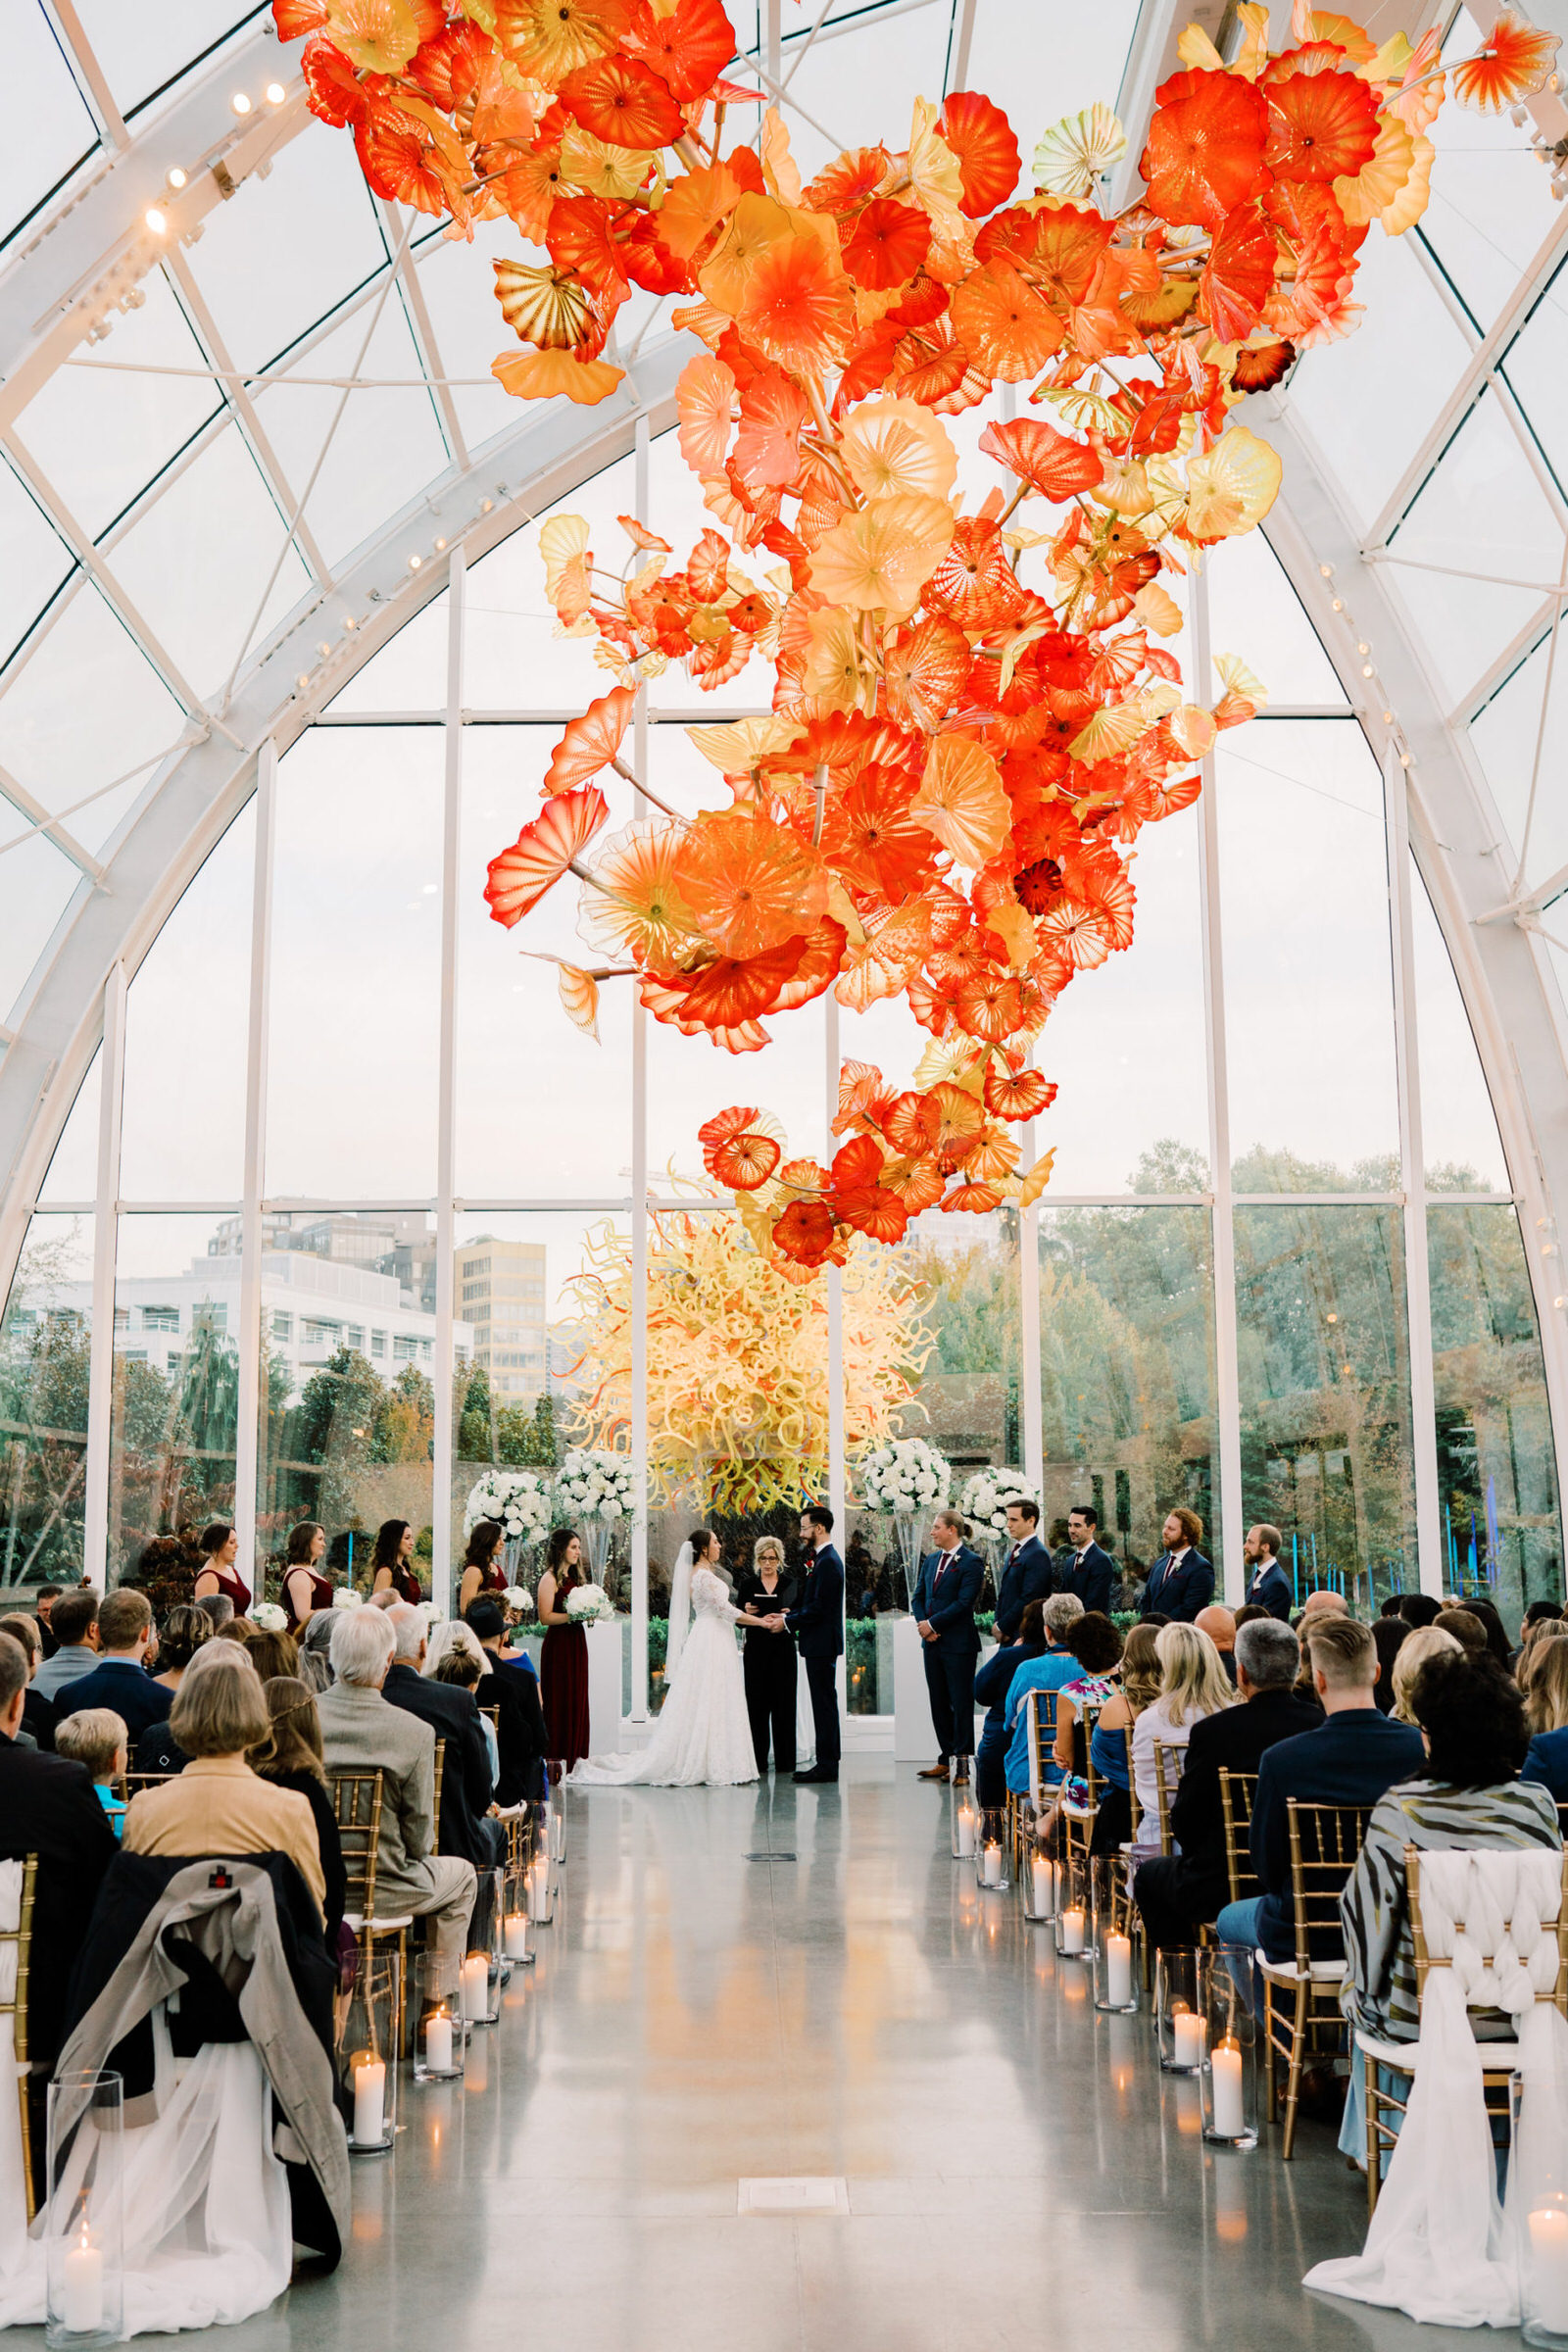 Lauren and Kyle's wedding ceremony at the Chihuly Garden and Glass